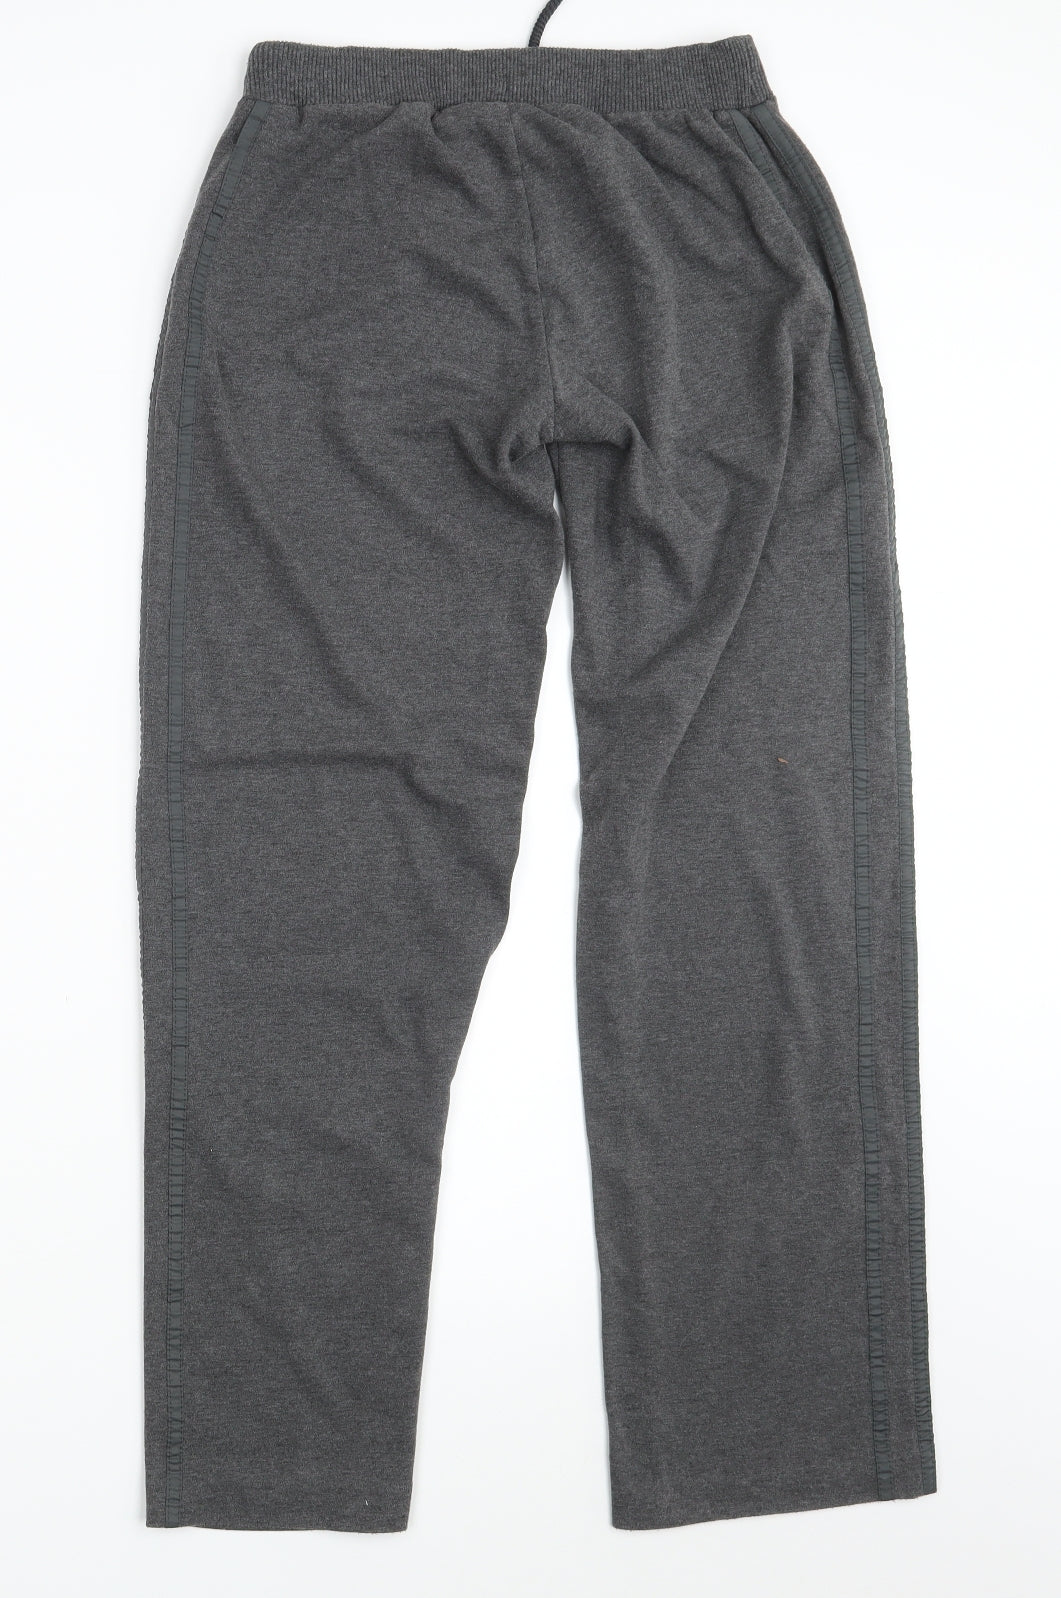 Lonsdale Boys Grey   Sweatpants Trousers Size 13 Years